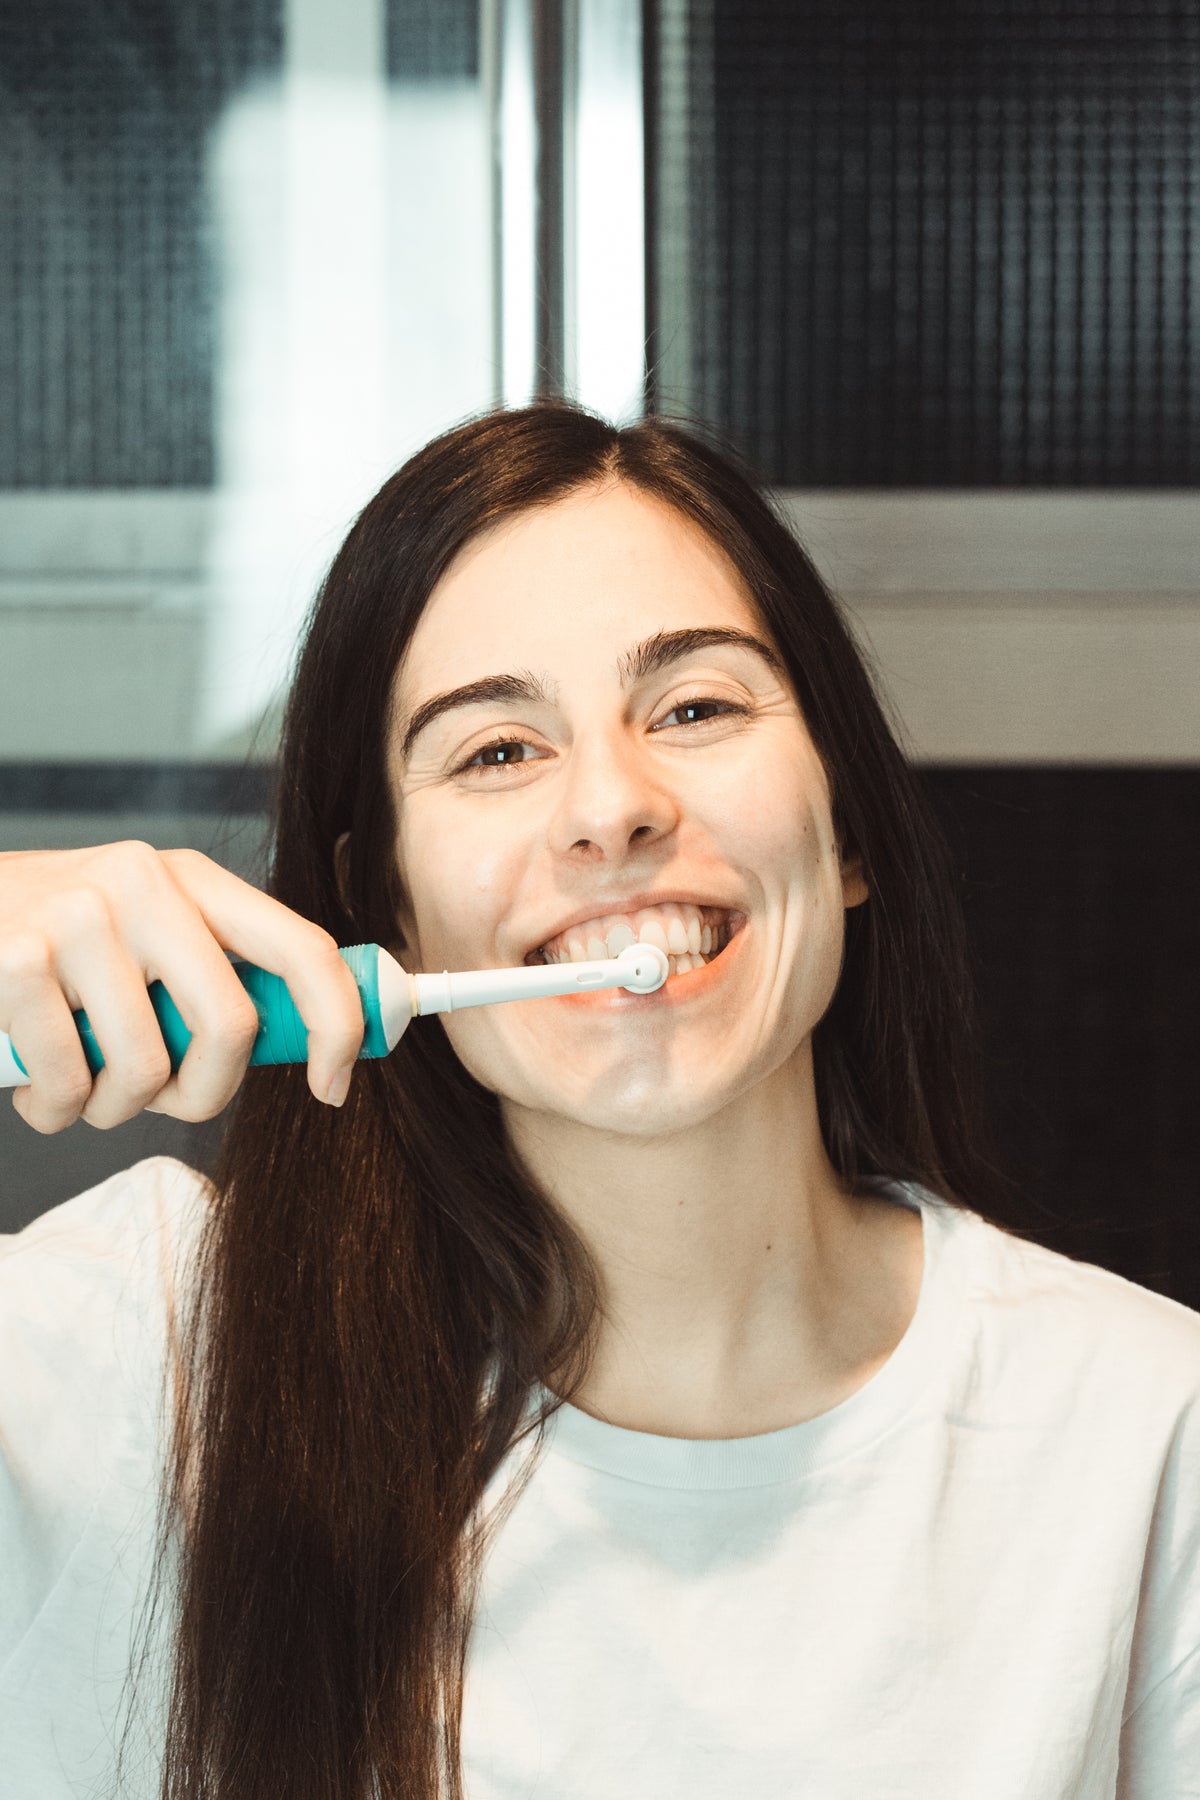 woman brushes her teeth with an electric toothbrush